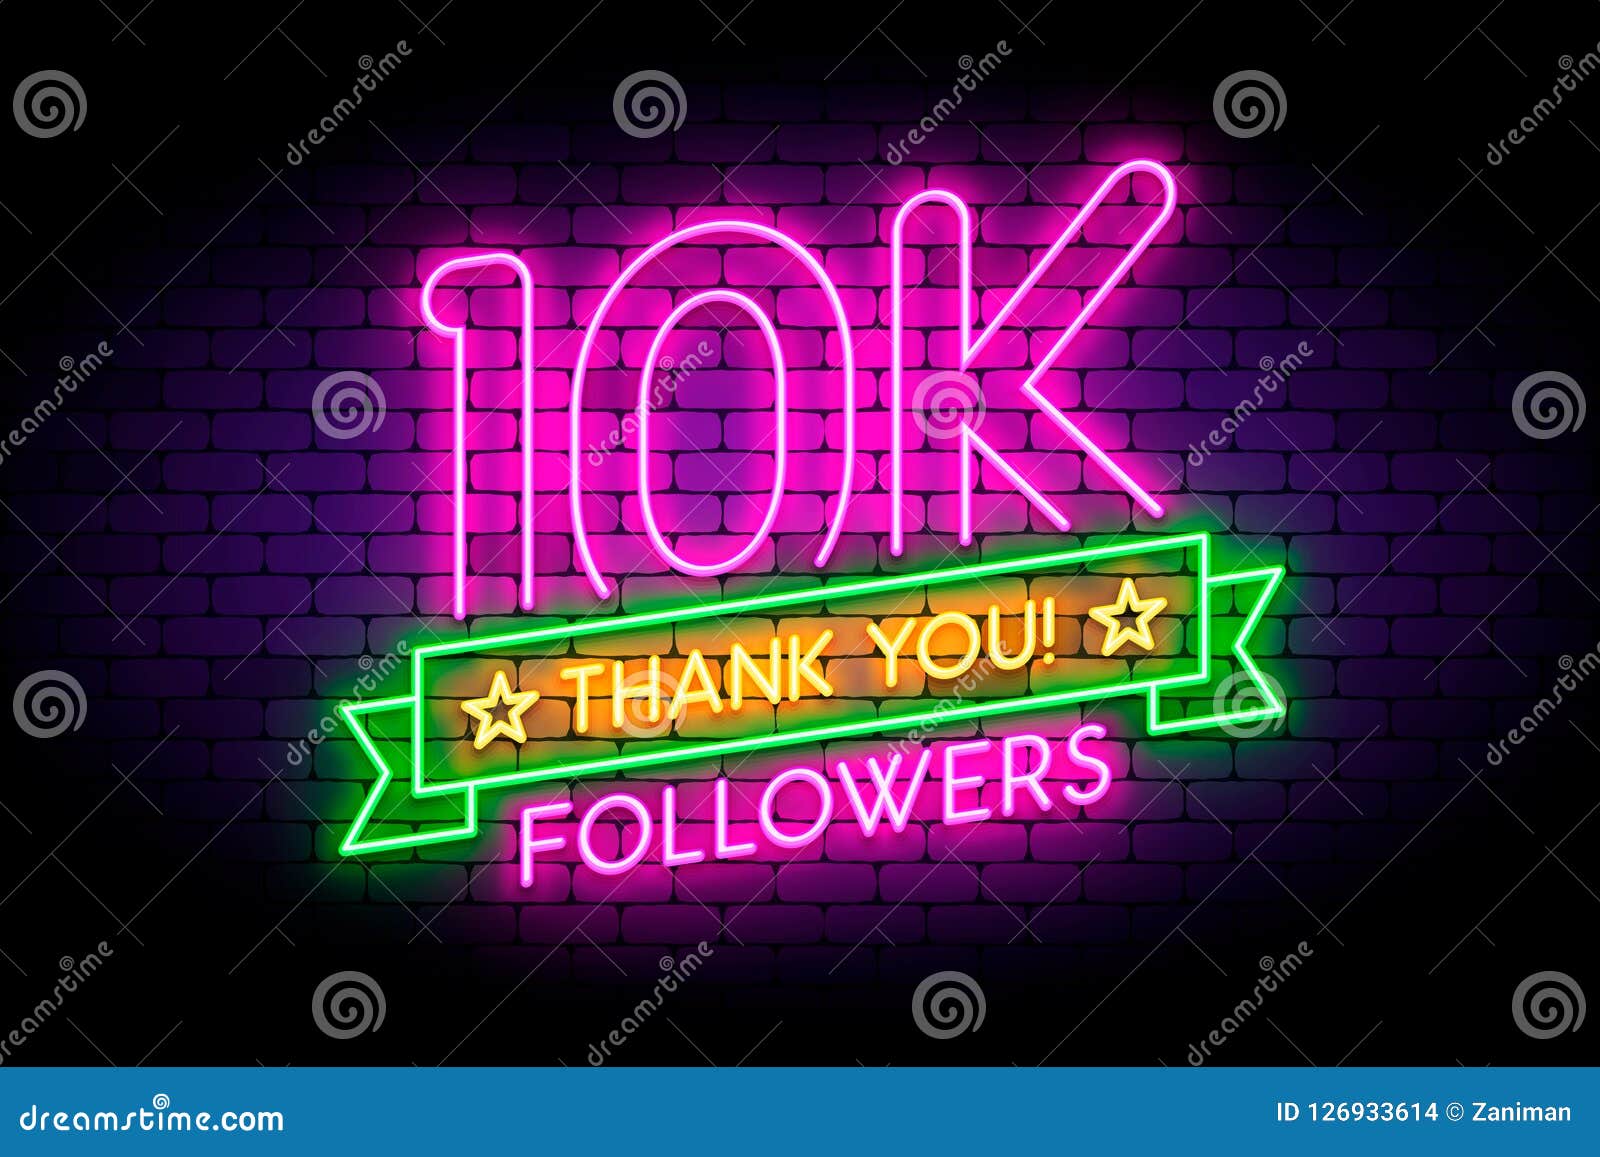 10k, 10000 followers neon sign on the wall.